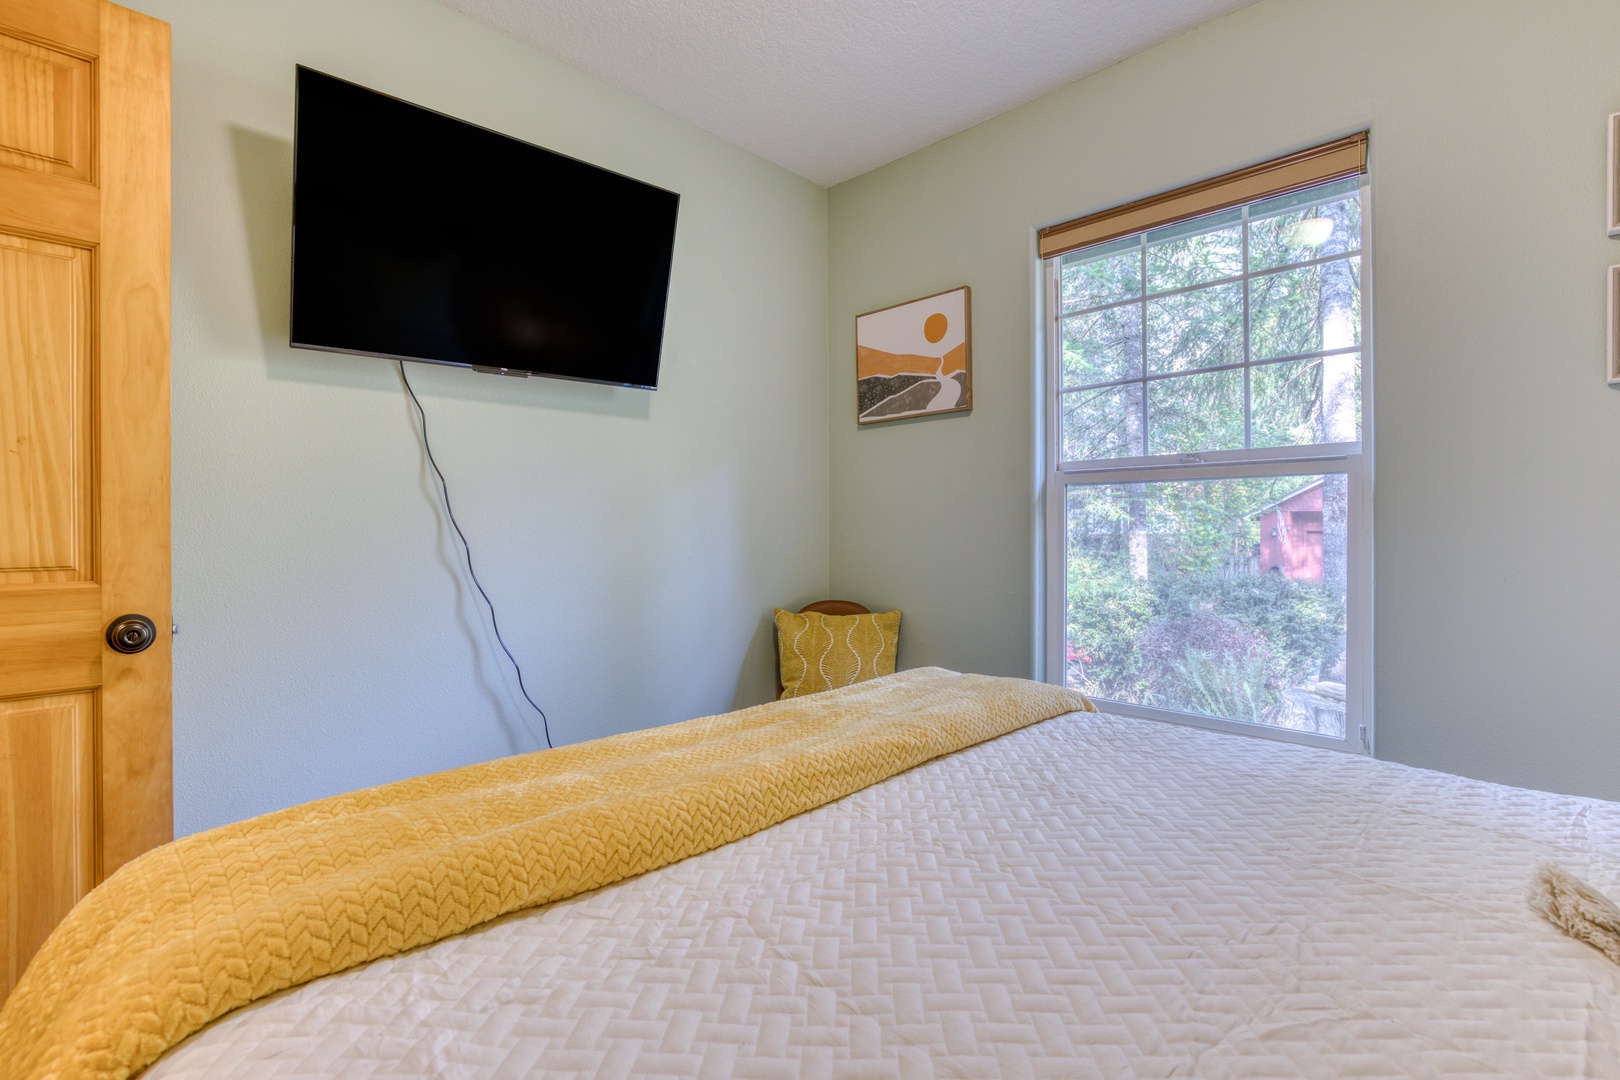 Brightwood Vacation Rentals, Riverside Retreat - Get a glimpse of the forest views through the window